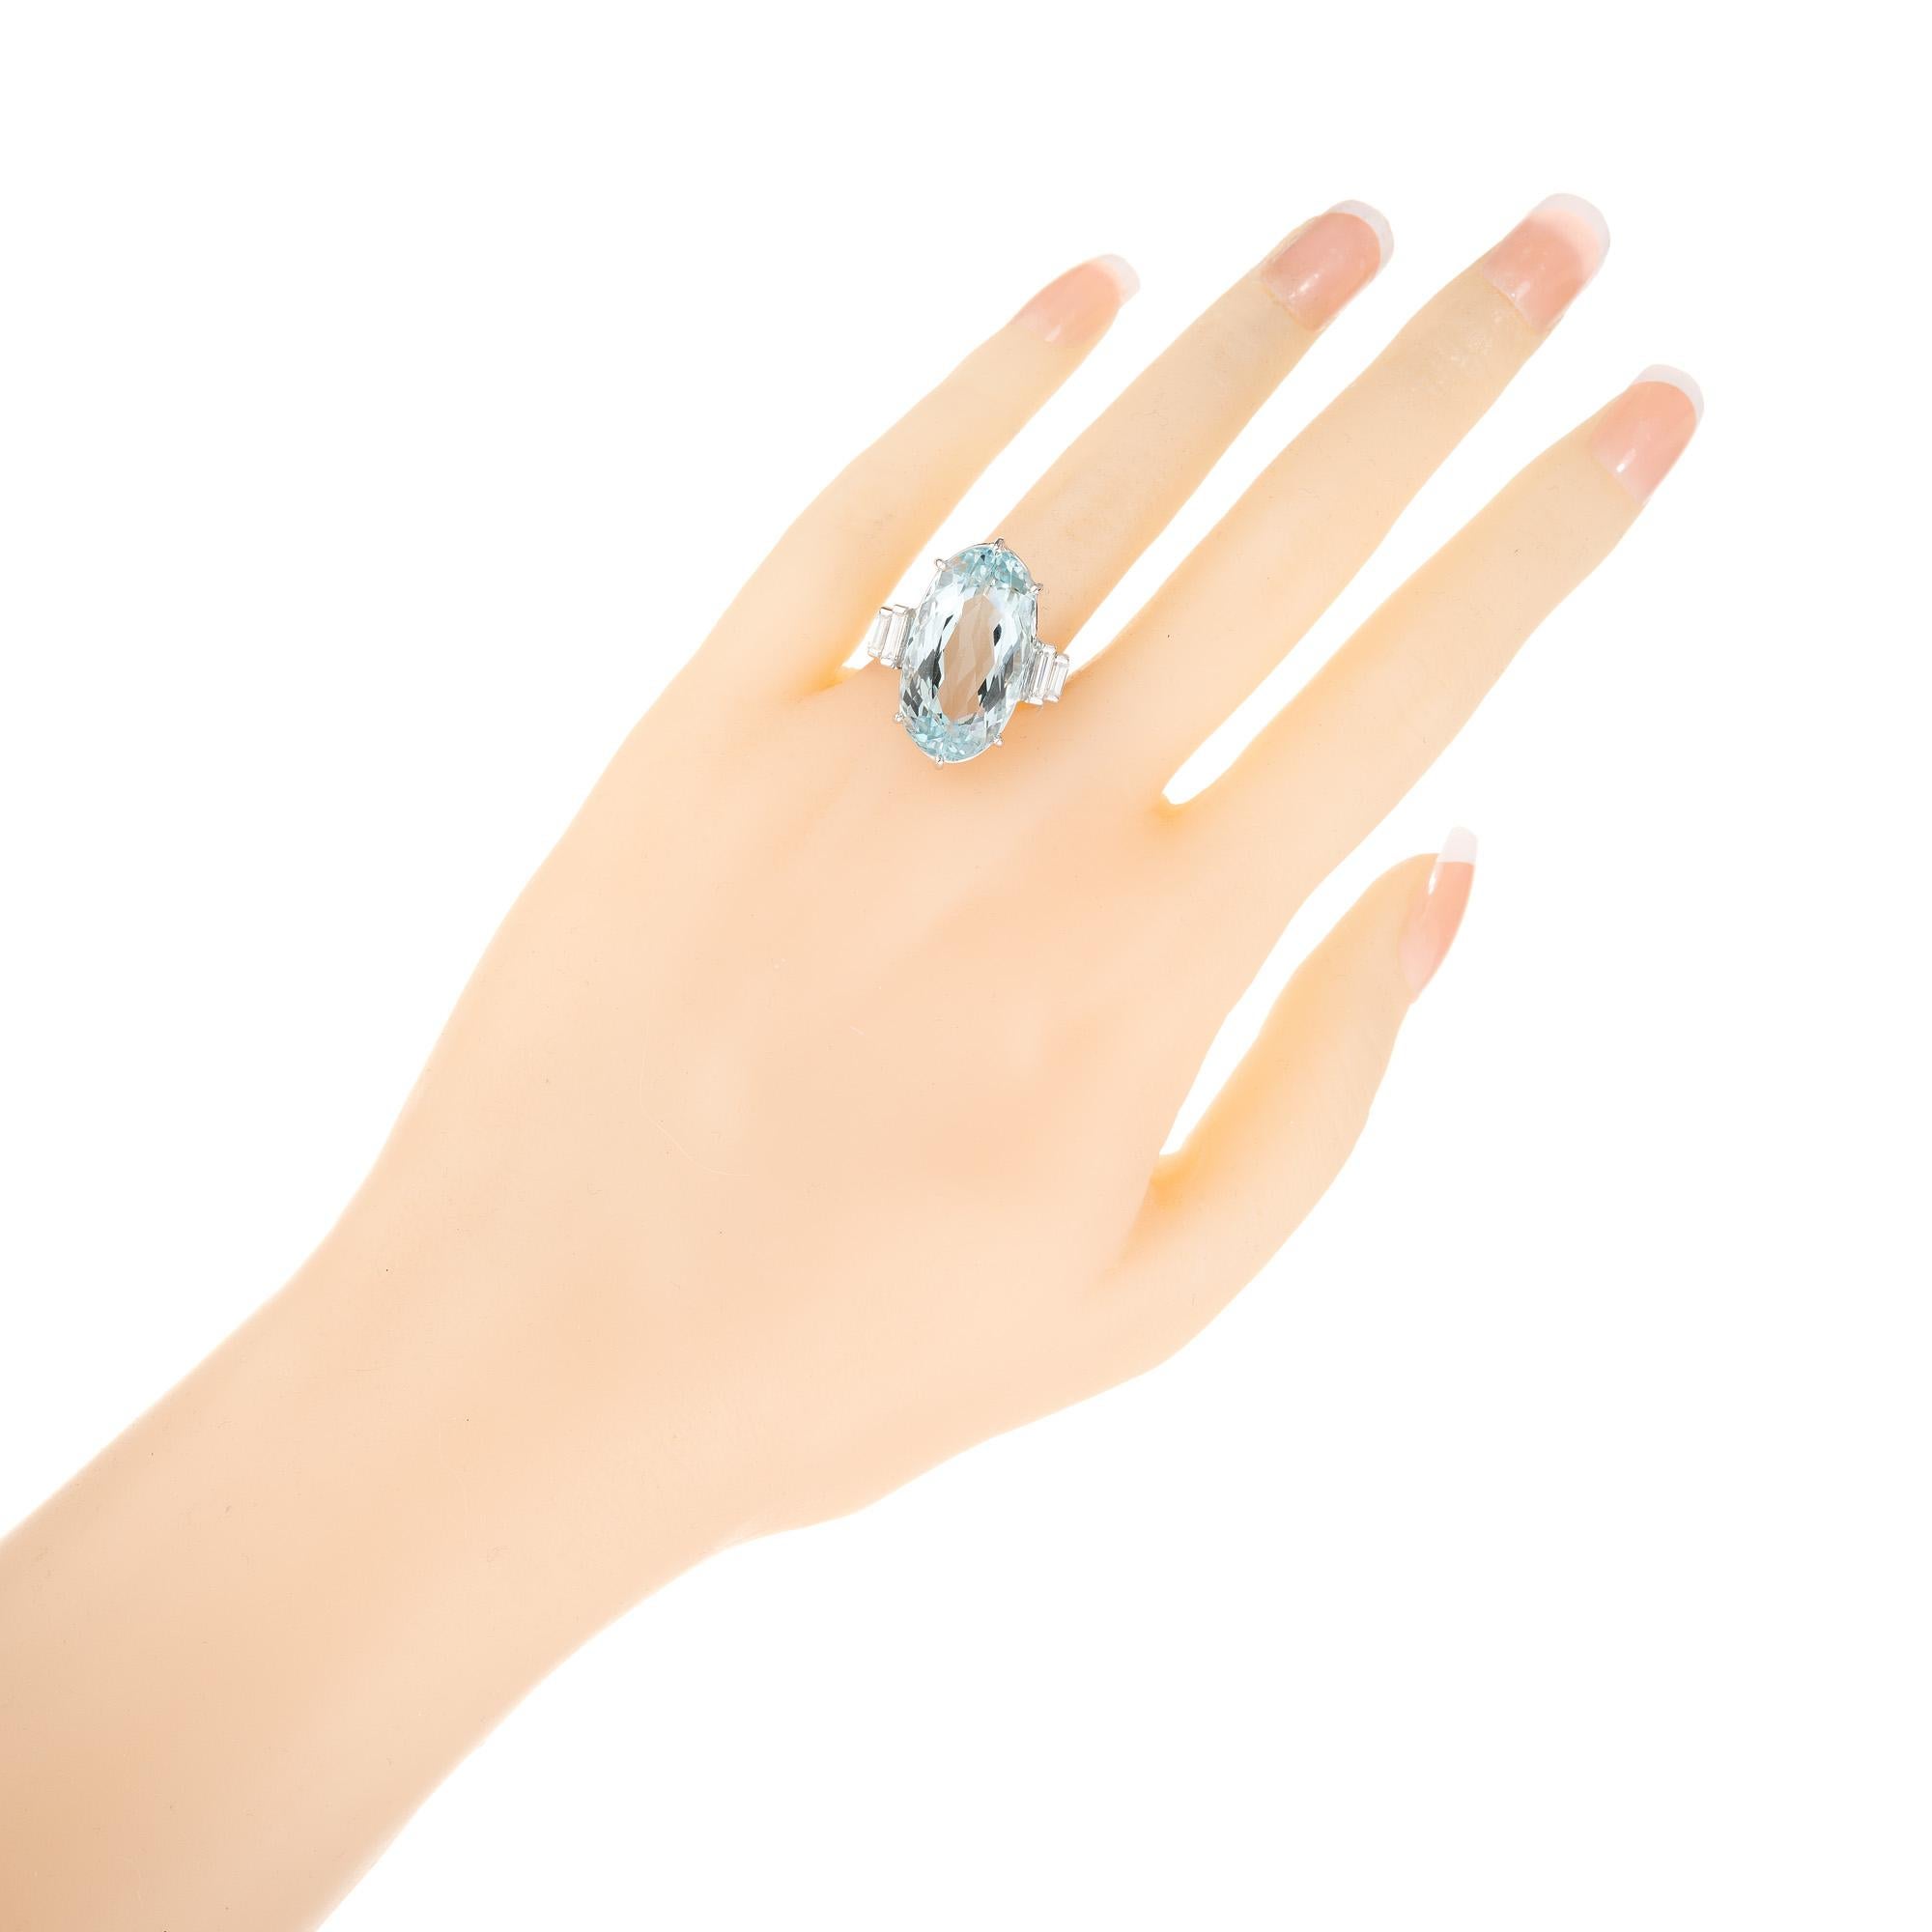 15.52 Carat Oval Aquamarine Diamond White Gold Cocktail Ring For Sale 1